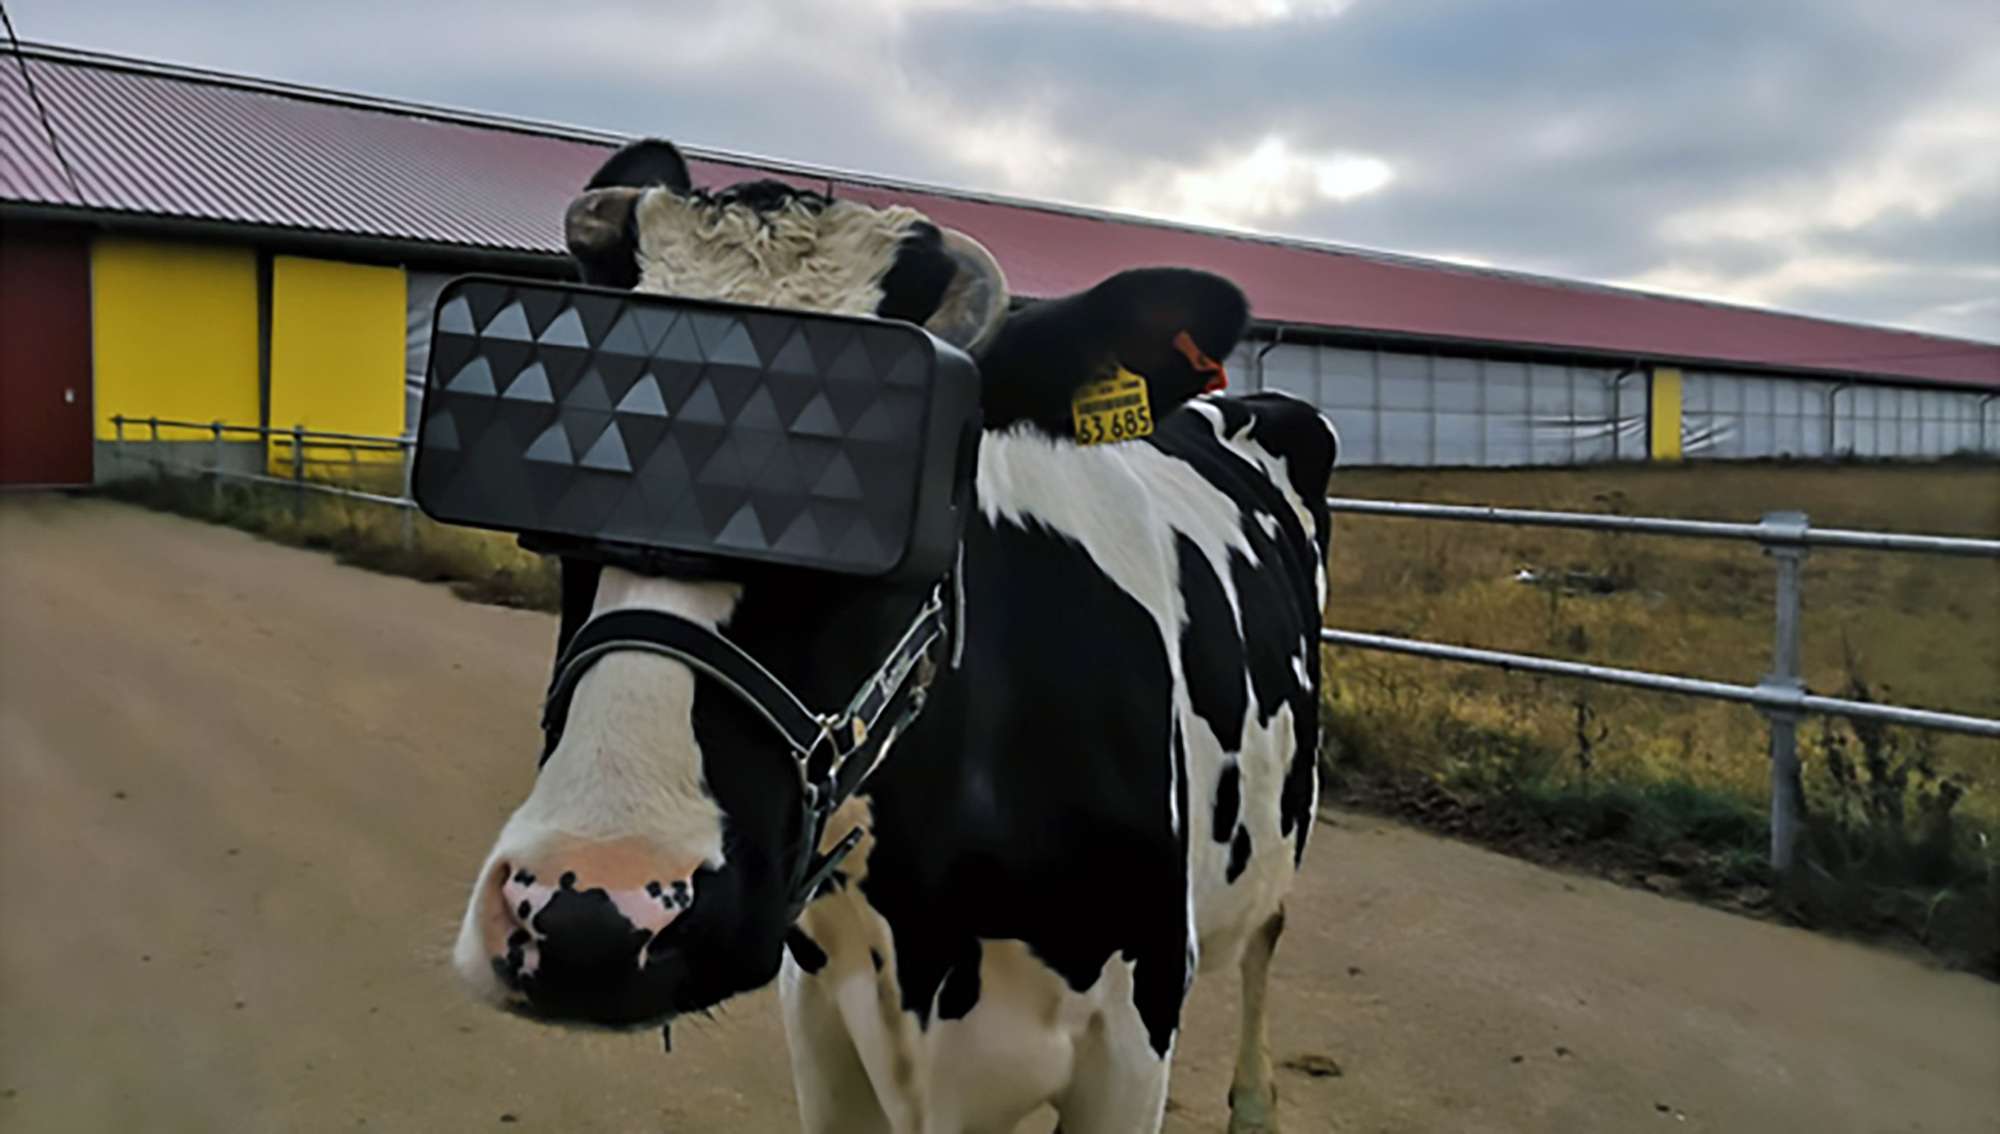 Sad Cows Fitted With VR Headset Showing…